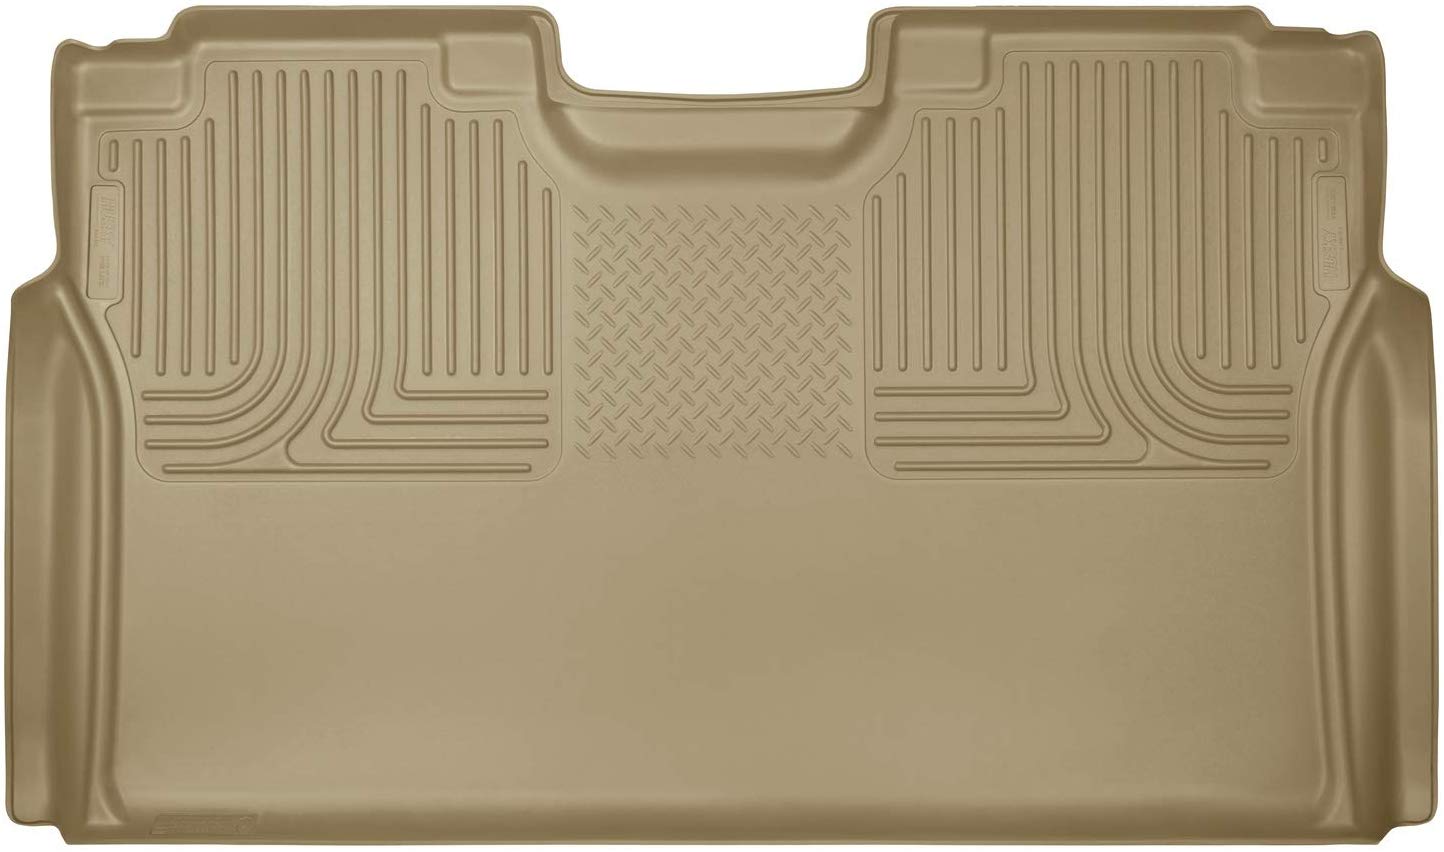 10 Best Floor Mats For Ford F150 Wonderful Engineering